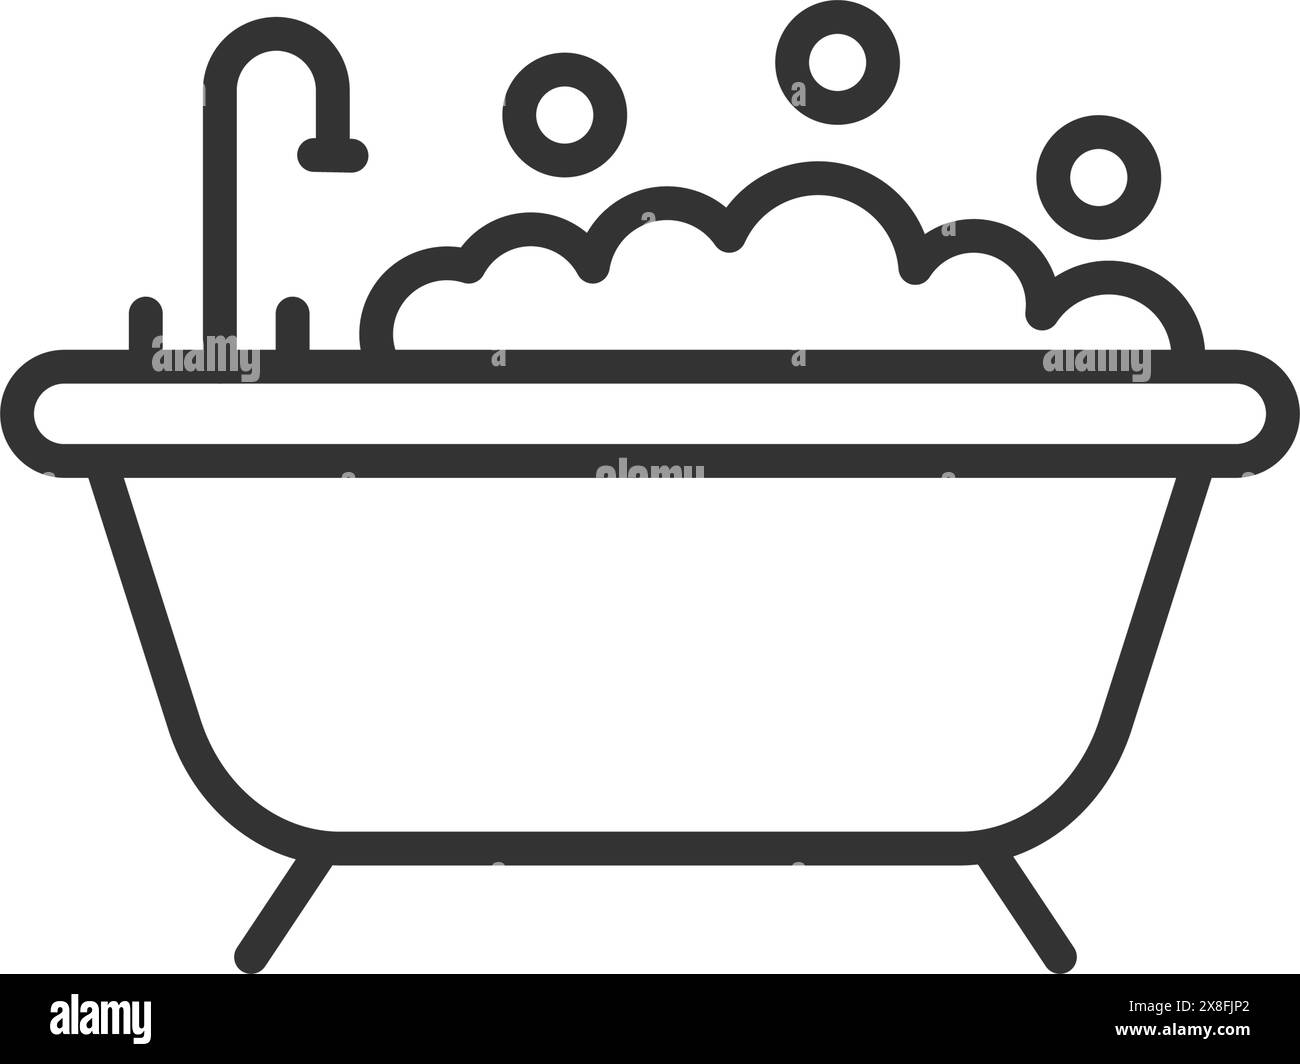 Bath icon in flat style. Bathroom vector illustration on isolated background. Bathtub sign business concept. Stock Vector